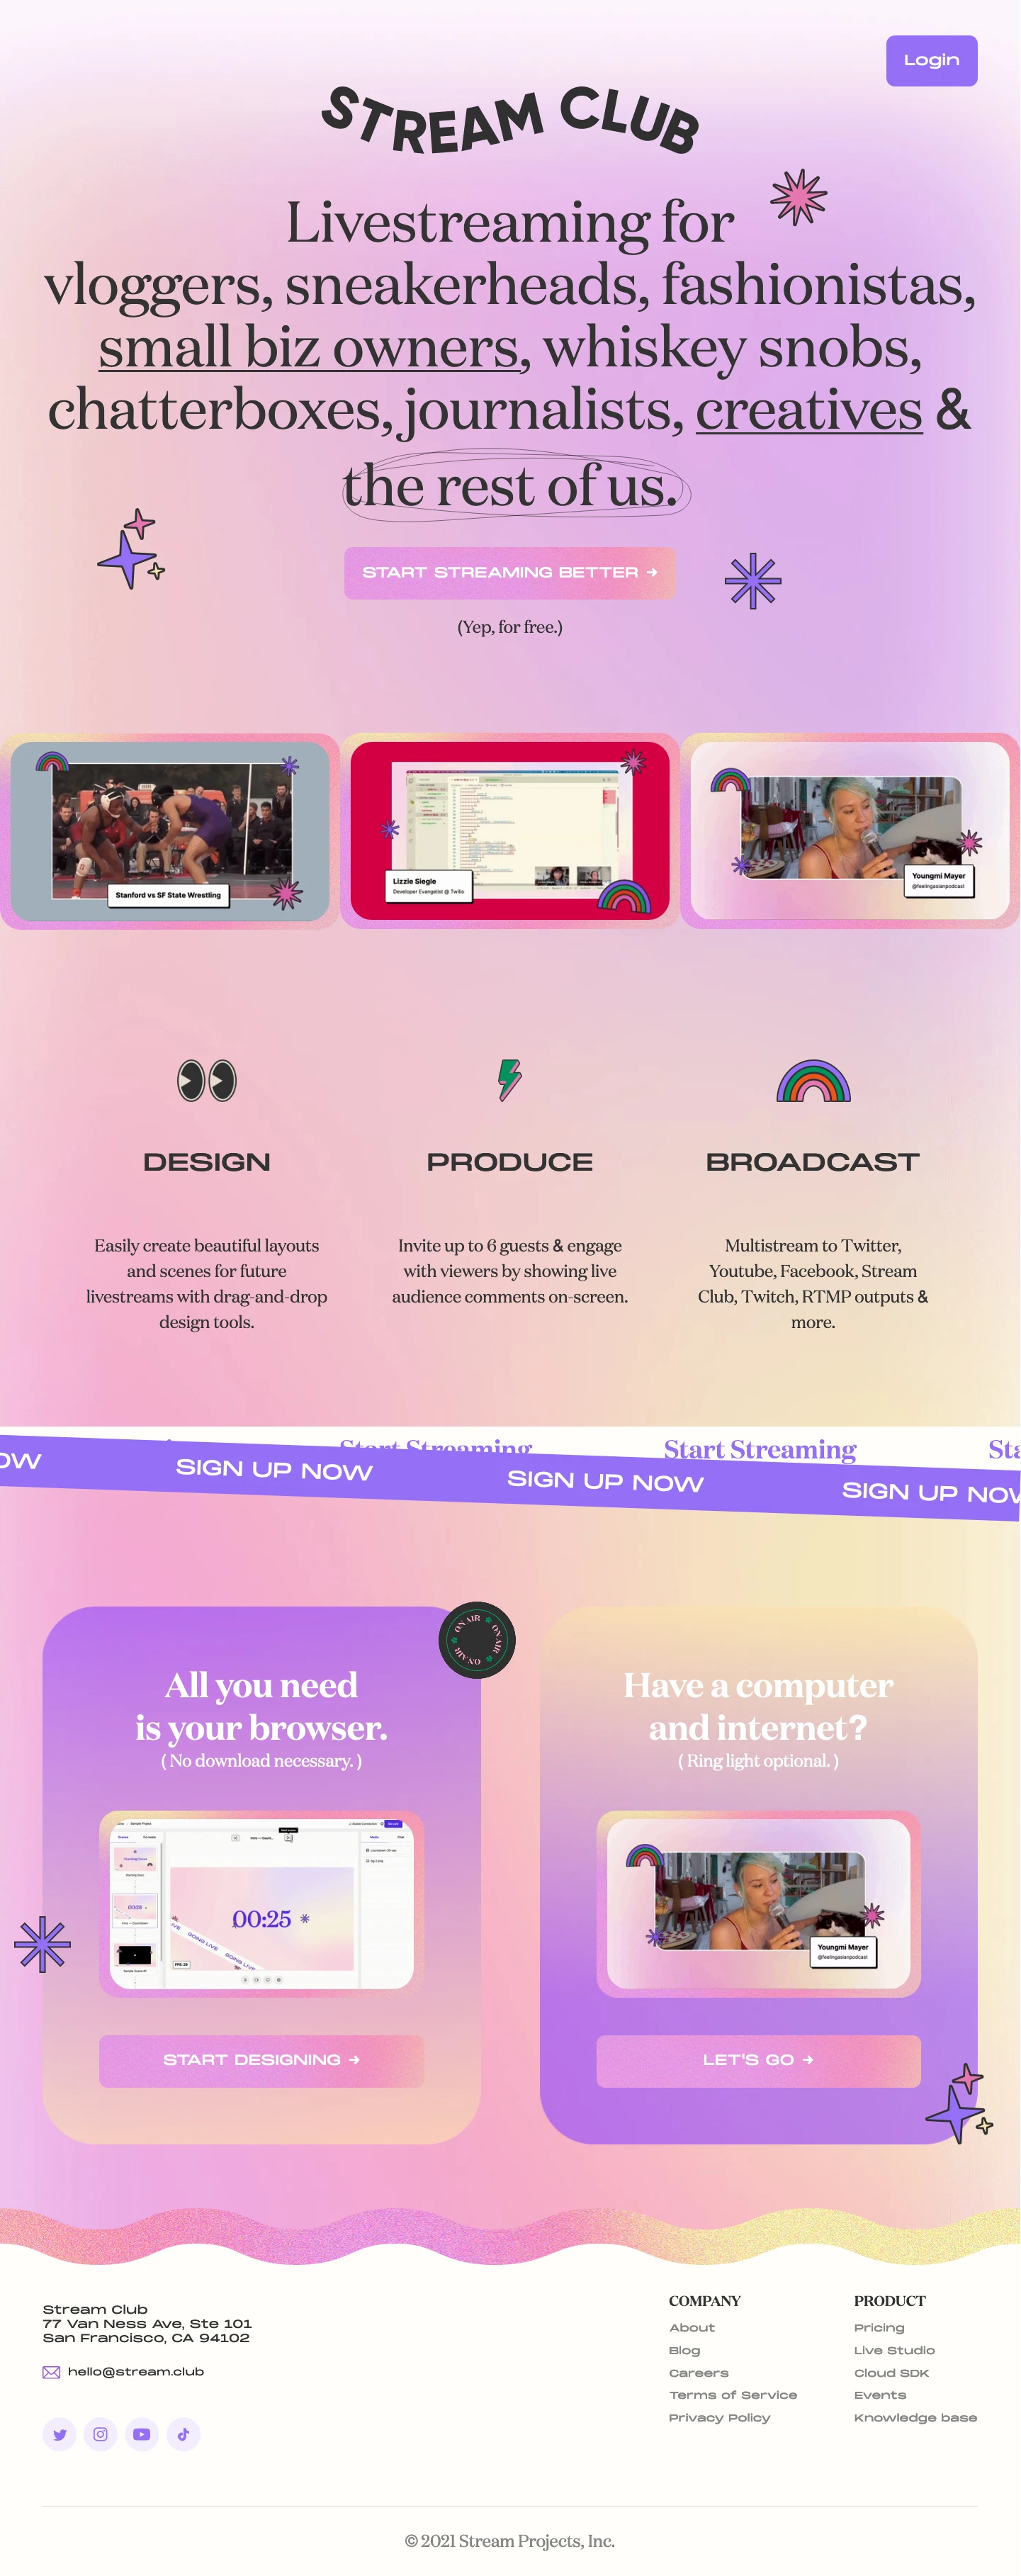 Stream Club Landing Page Example: Stream Club is the easiest way to design, produce, and broadcast a beautiful livestream straight from your browser. Livestreaming for vloggers, sneakerheads, fashionistas, small biz owners, whiskey snobs, chatterboxes, journalists, creatives & the rest of us.